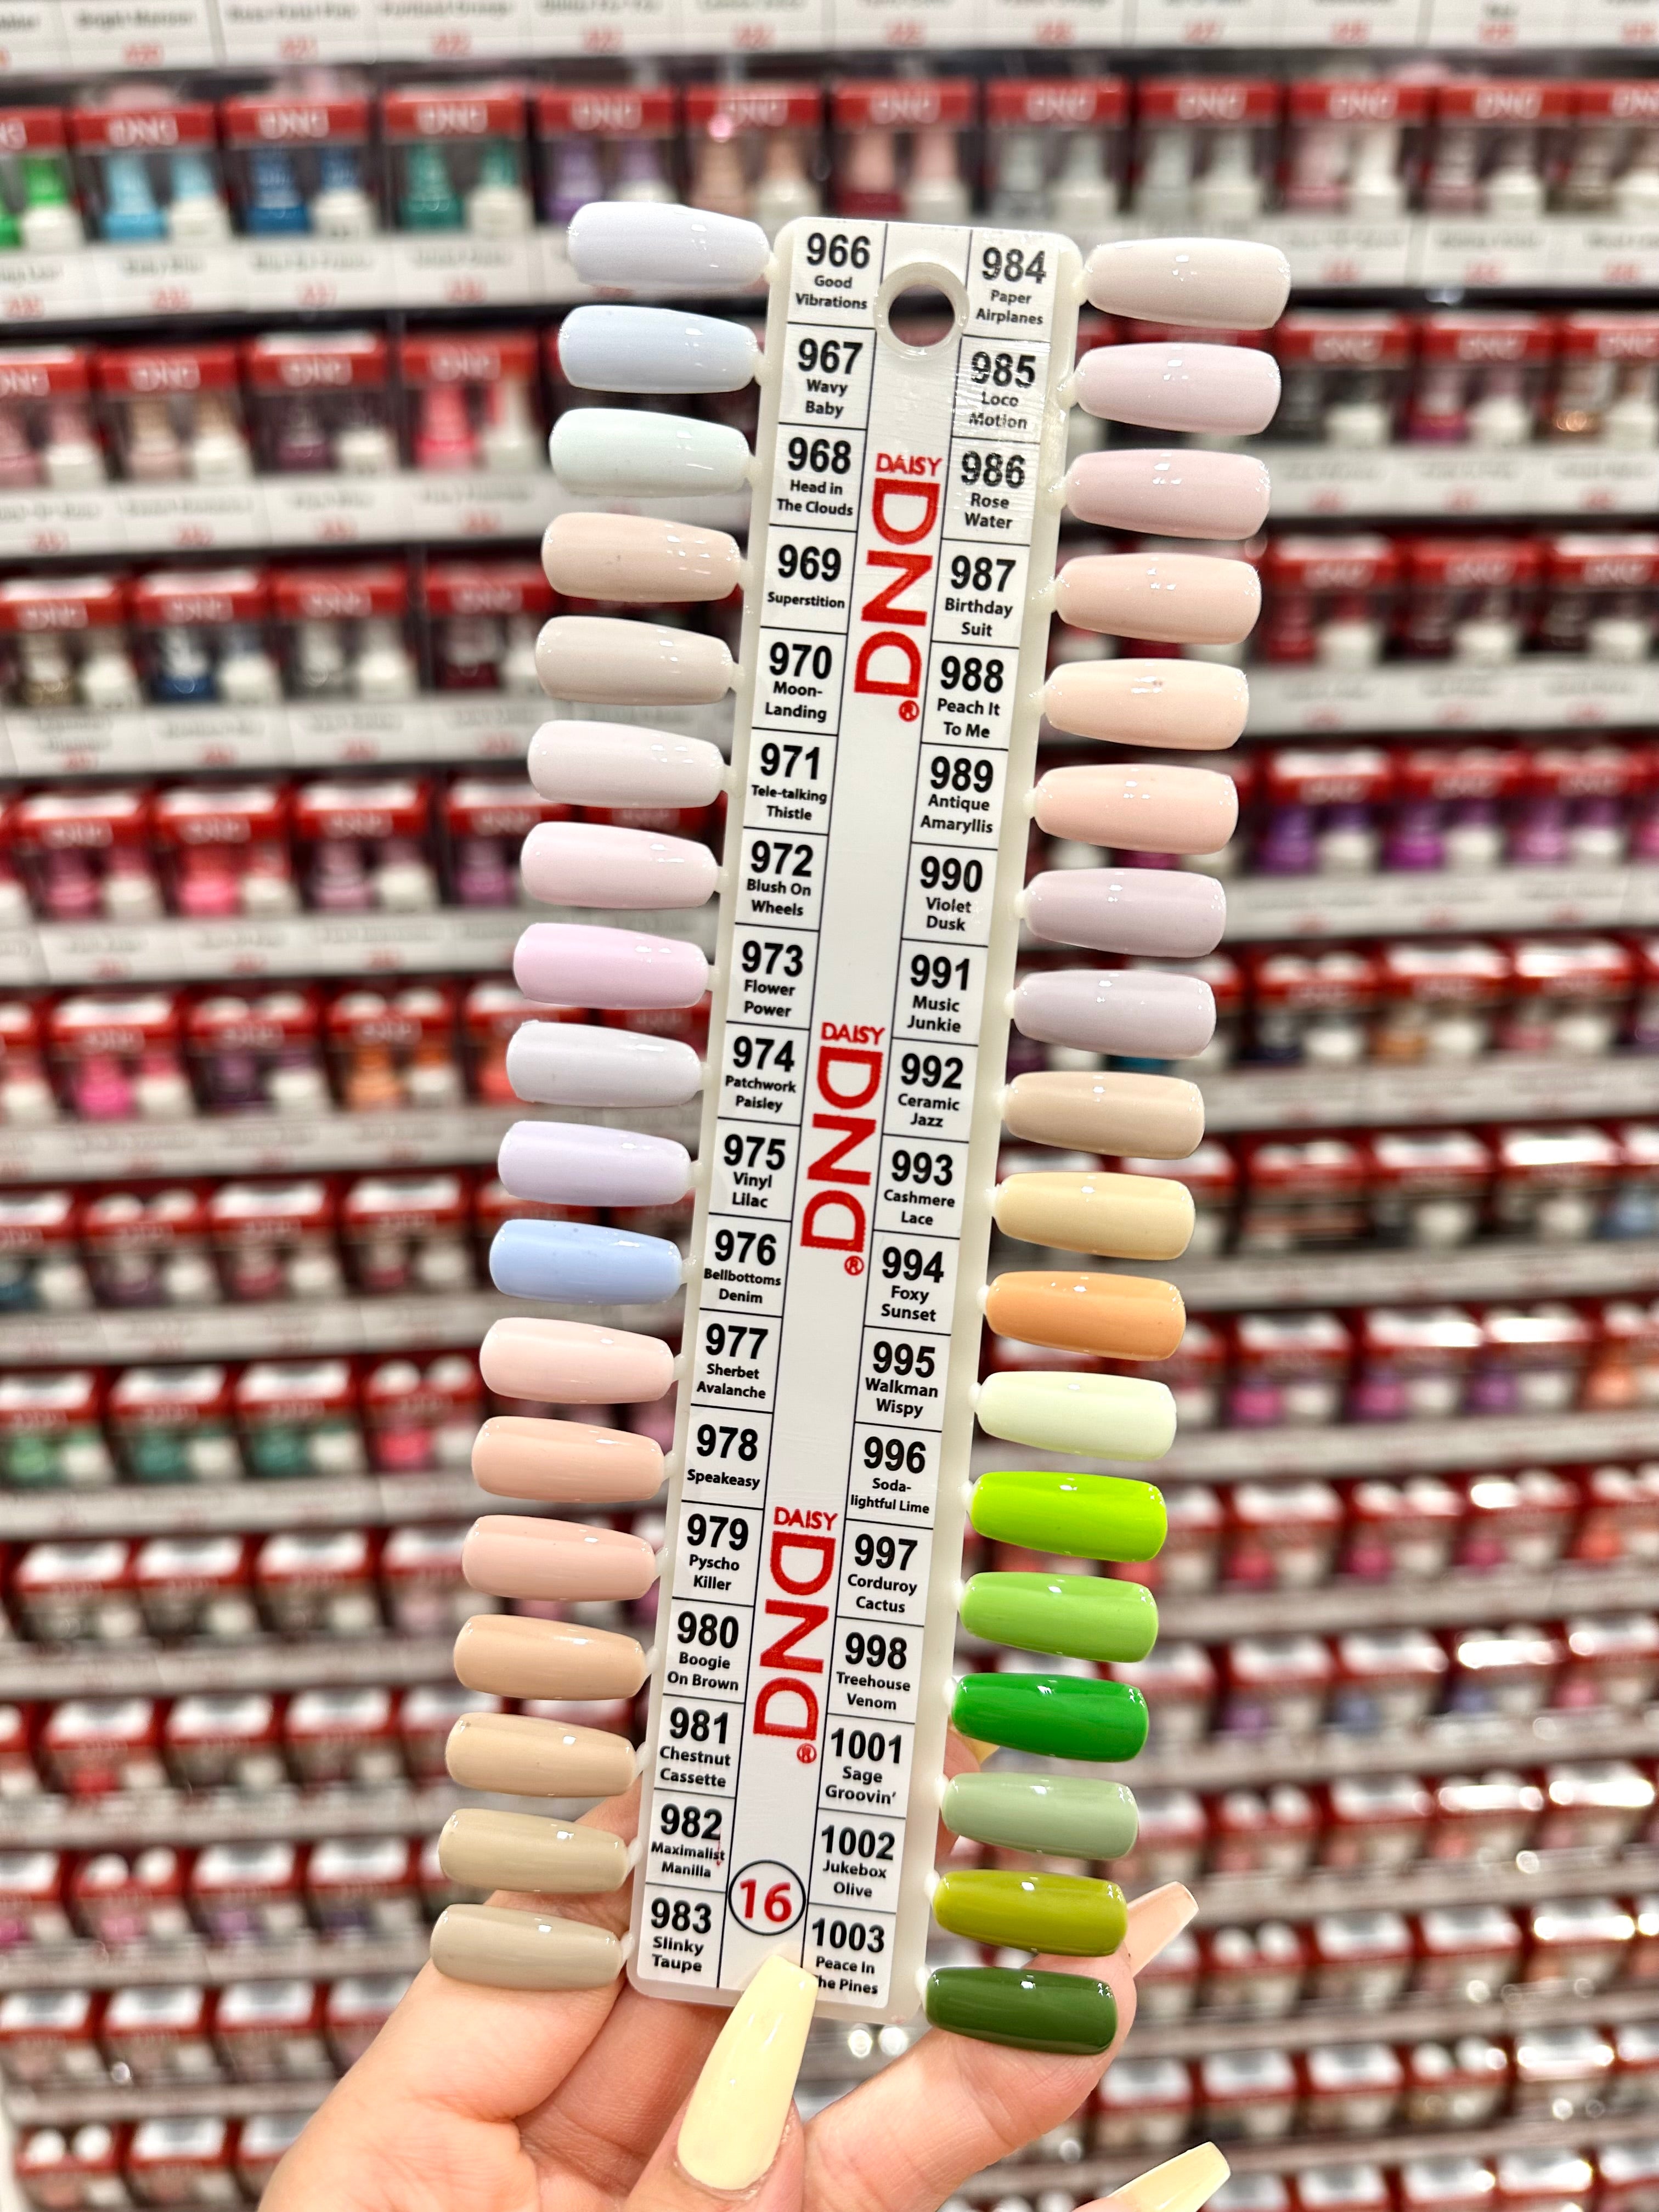 DND Gel Europe - Save this post for when you're at the salon wanting sheer  nails 💅🏽 💖 PROM DC268 💖 SILKY PEACH DC149 💖 BEIGE PINK DC150 💖 ICY  PINK DC165